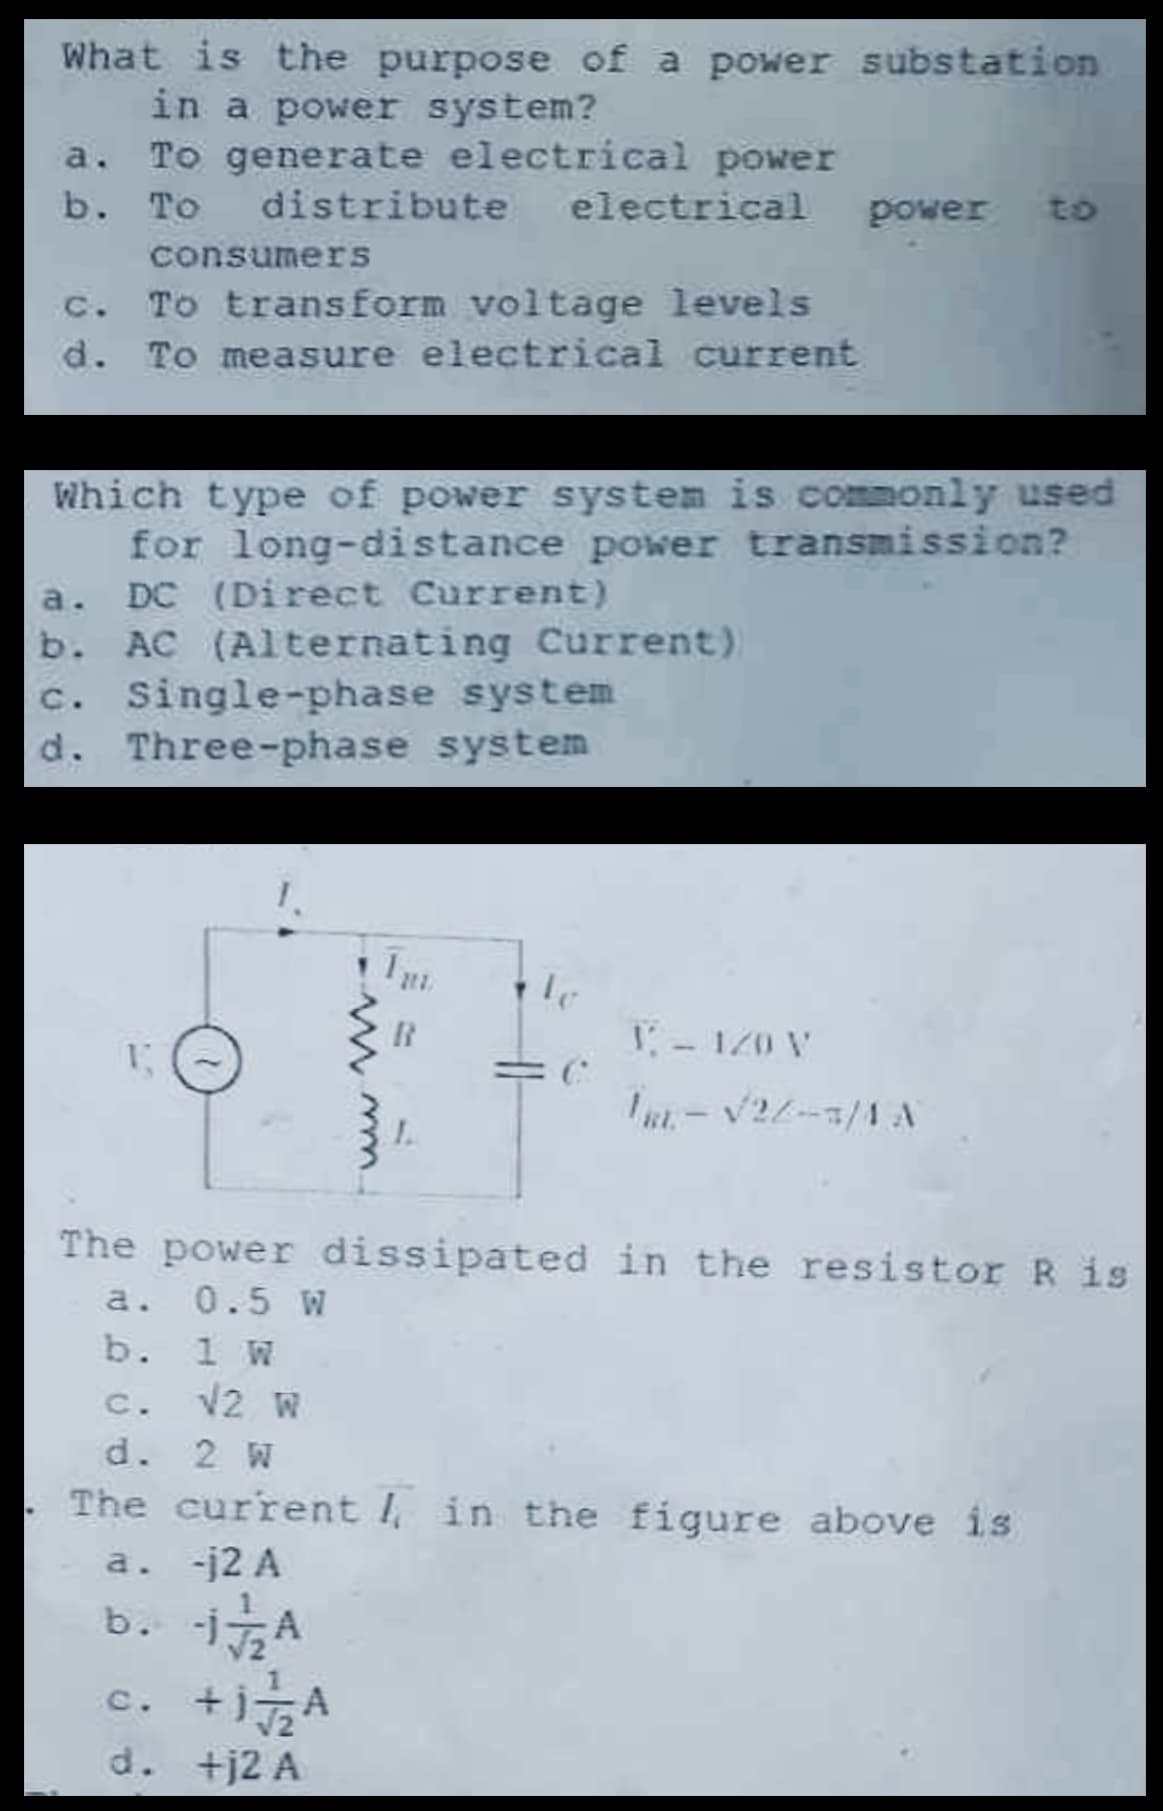 What is the purpose of a power substation
in a power system?
a. To generate electrical power
b. To
distribute
consumers
electrical power
to
c. To transform voltage levels
d. To measure electrical current
Which type of power system is commonly used
for long-distance power transmission?
a. DC (Direct Current)
b. AC (Alternating Current)
c. Single-phase system
d. Three-phase system
www
B
1-120 V
=6
BL-√2/3/4 A
L
The power dissipated in the resistor R is
a. 0.5 W
b. 1 W
c. √2 W
d. 2 W
The current in the figure above is
a. -j2 A
b.
-1A
c. +j
+1¬A
d. +j2 A